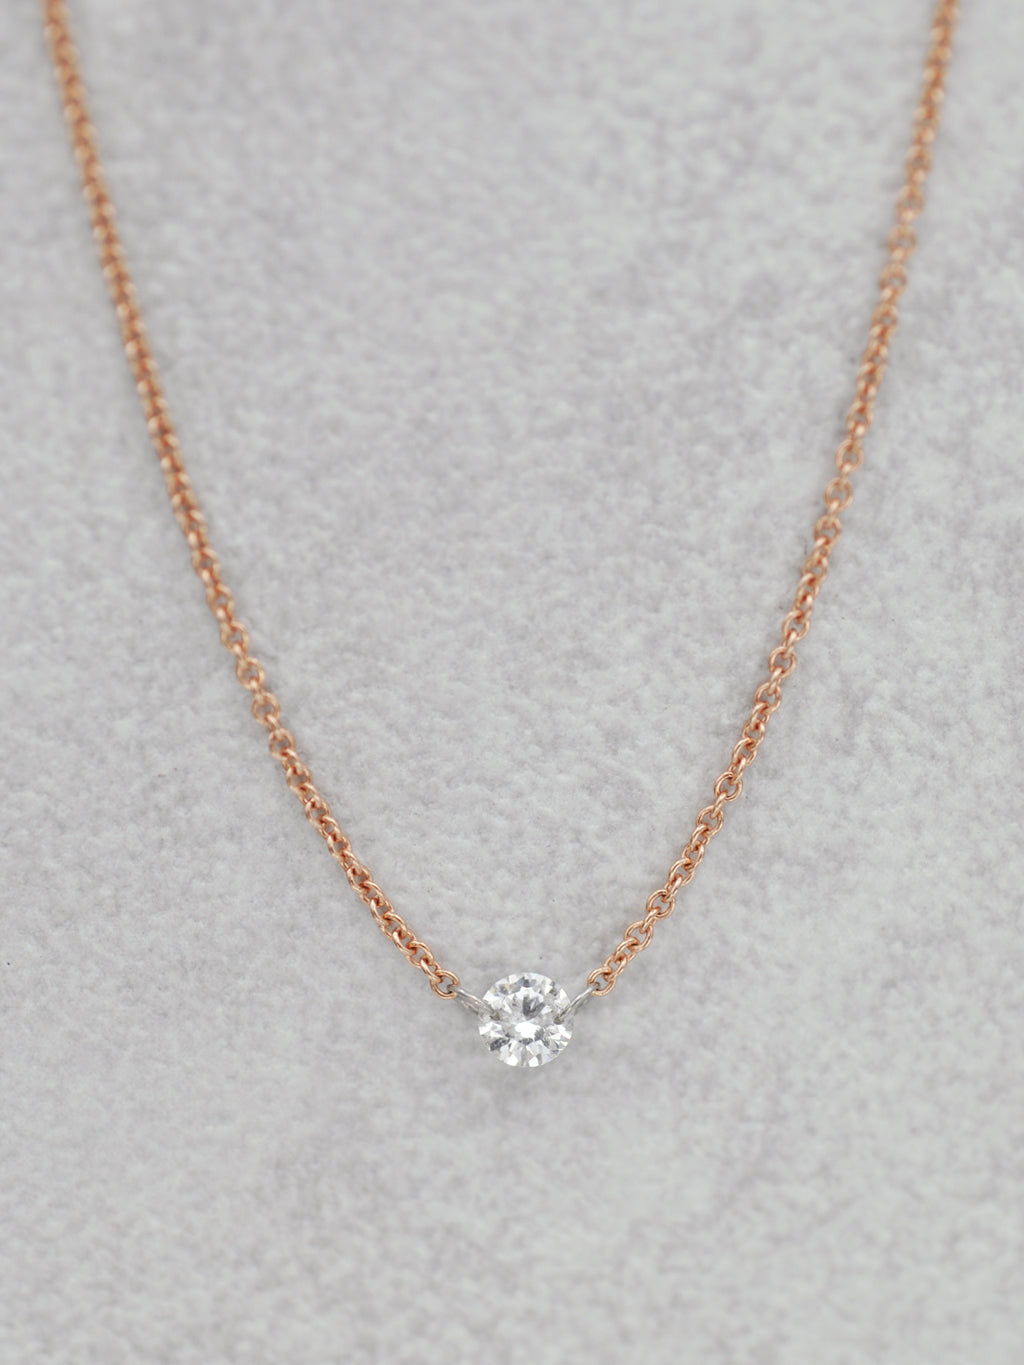 Rubans Rose Gold Plated White Beads American Diamond Necklace Set.